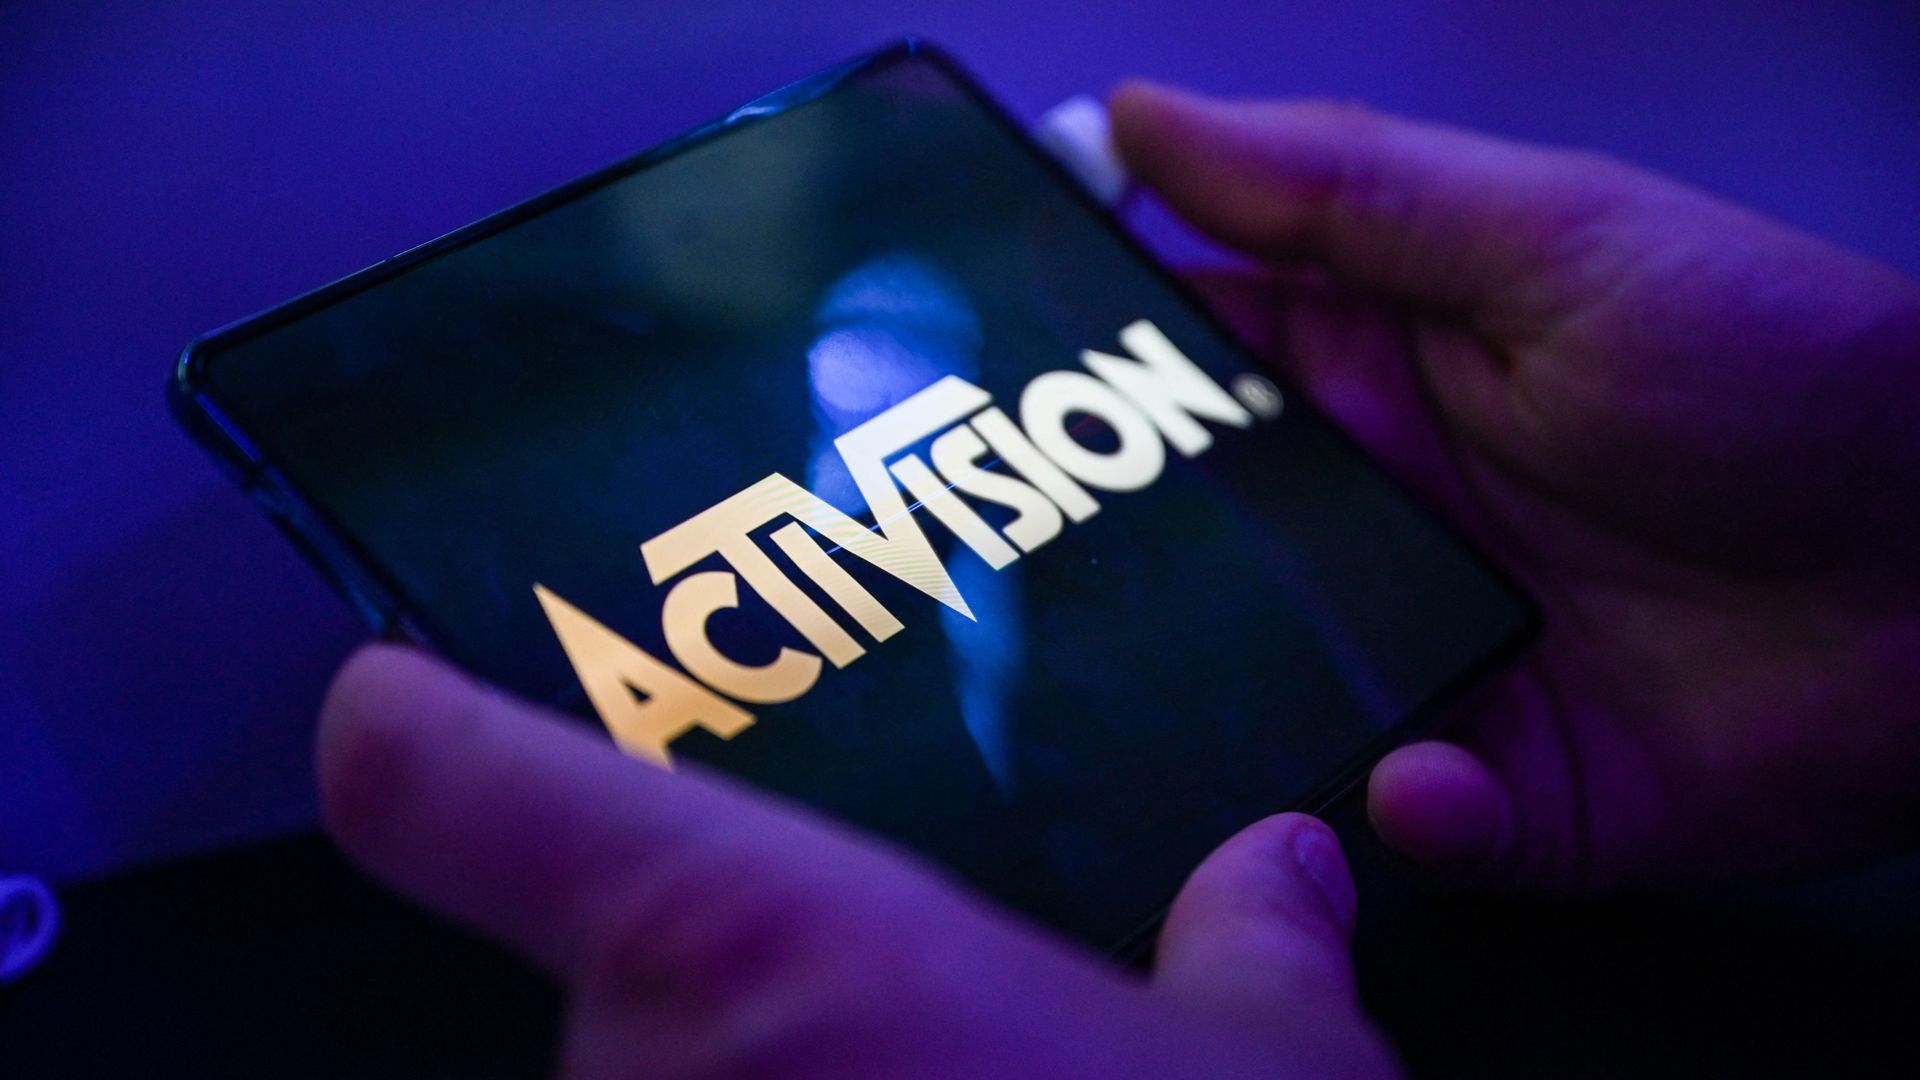 Close-up photo of a person's hands as they hold a cell phone that is displaying an Activision logo